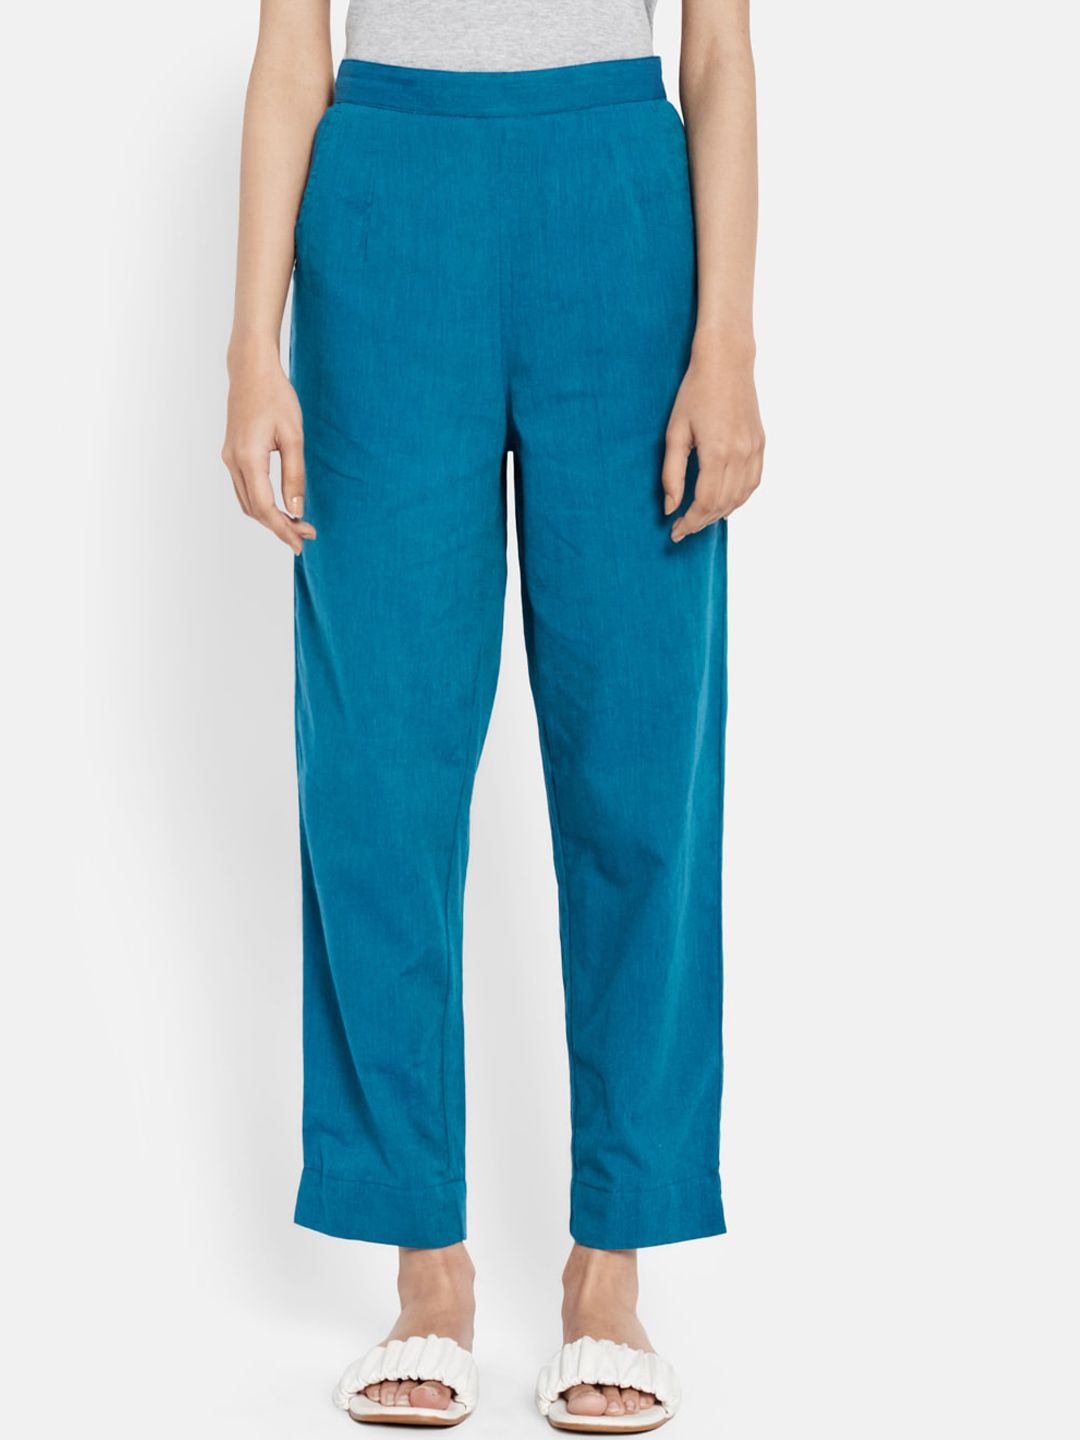 Fabindia Women Blue Casual Cotton Trousers Price in India